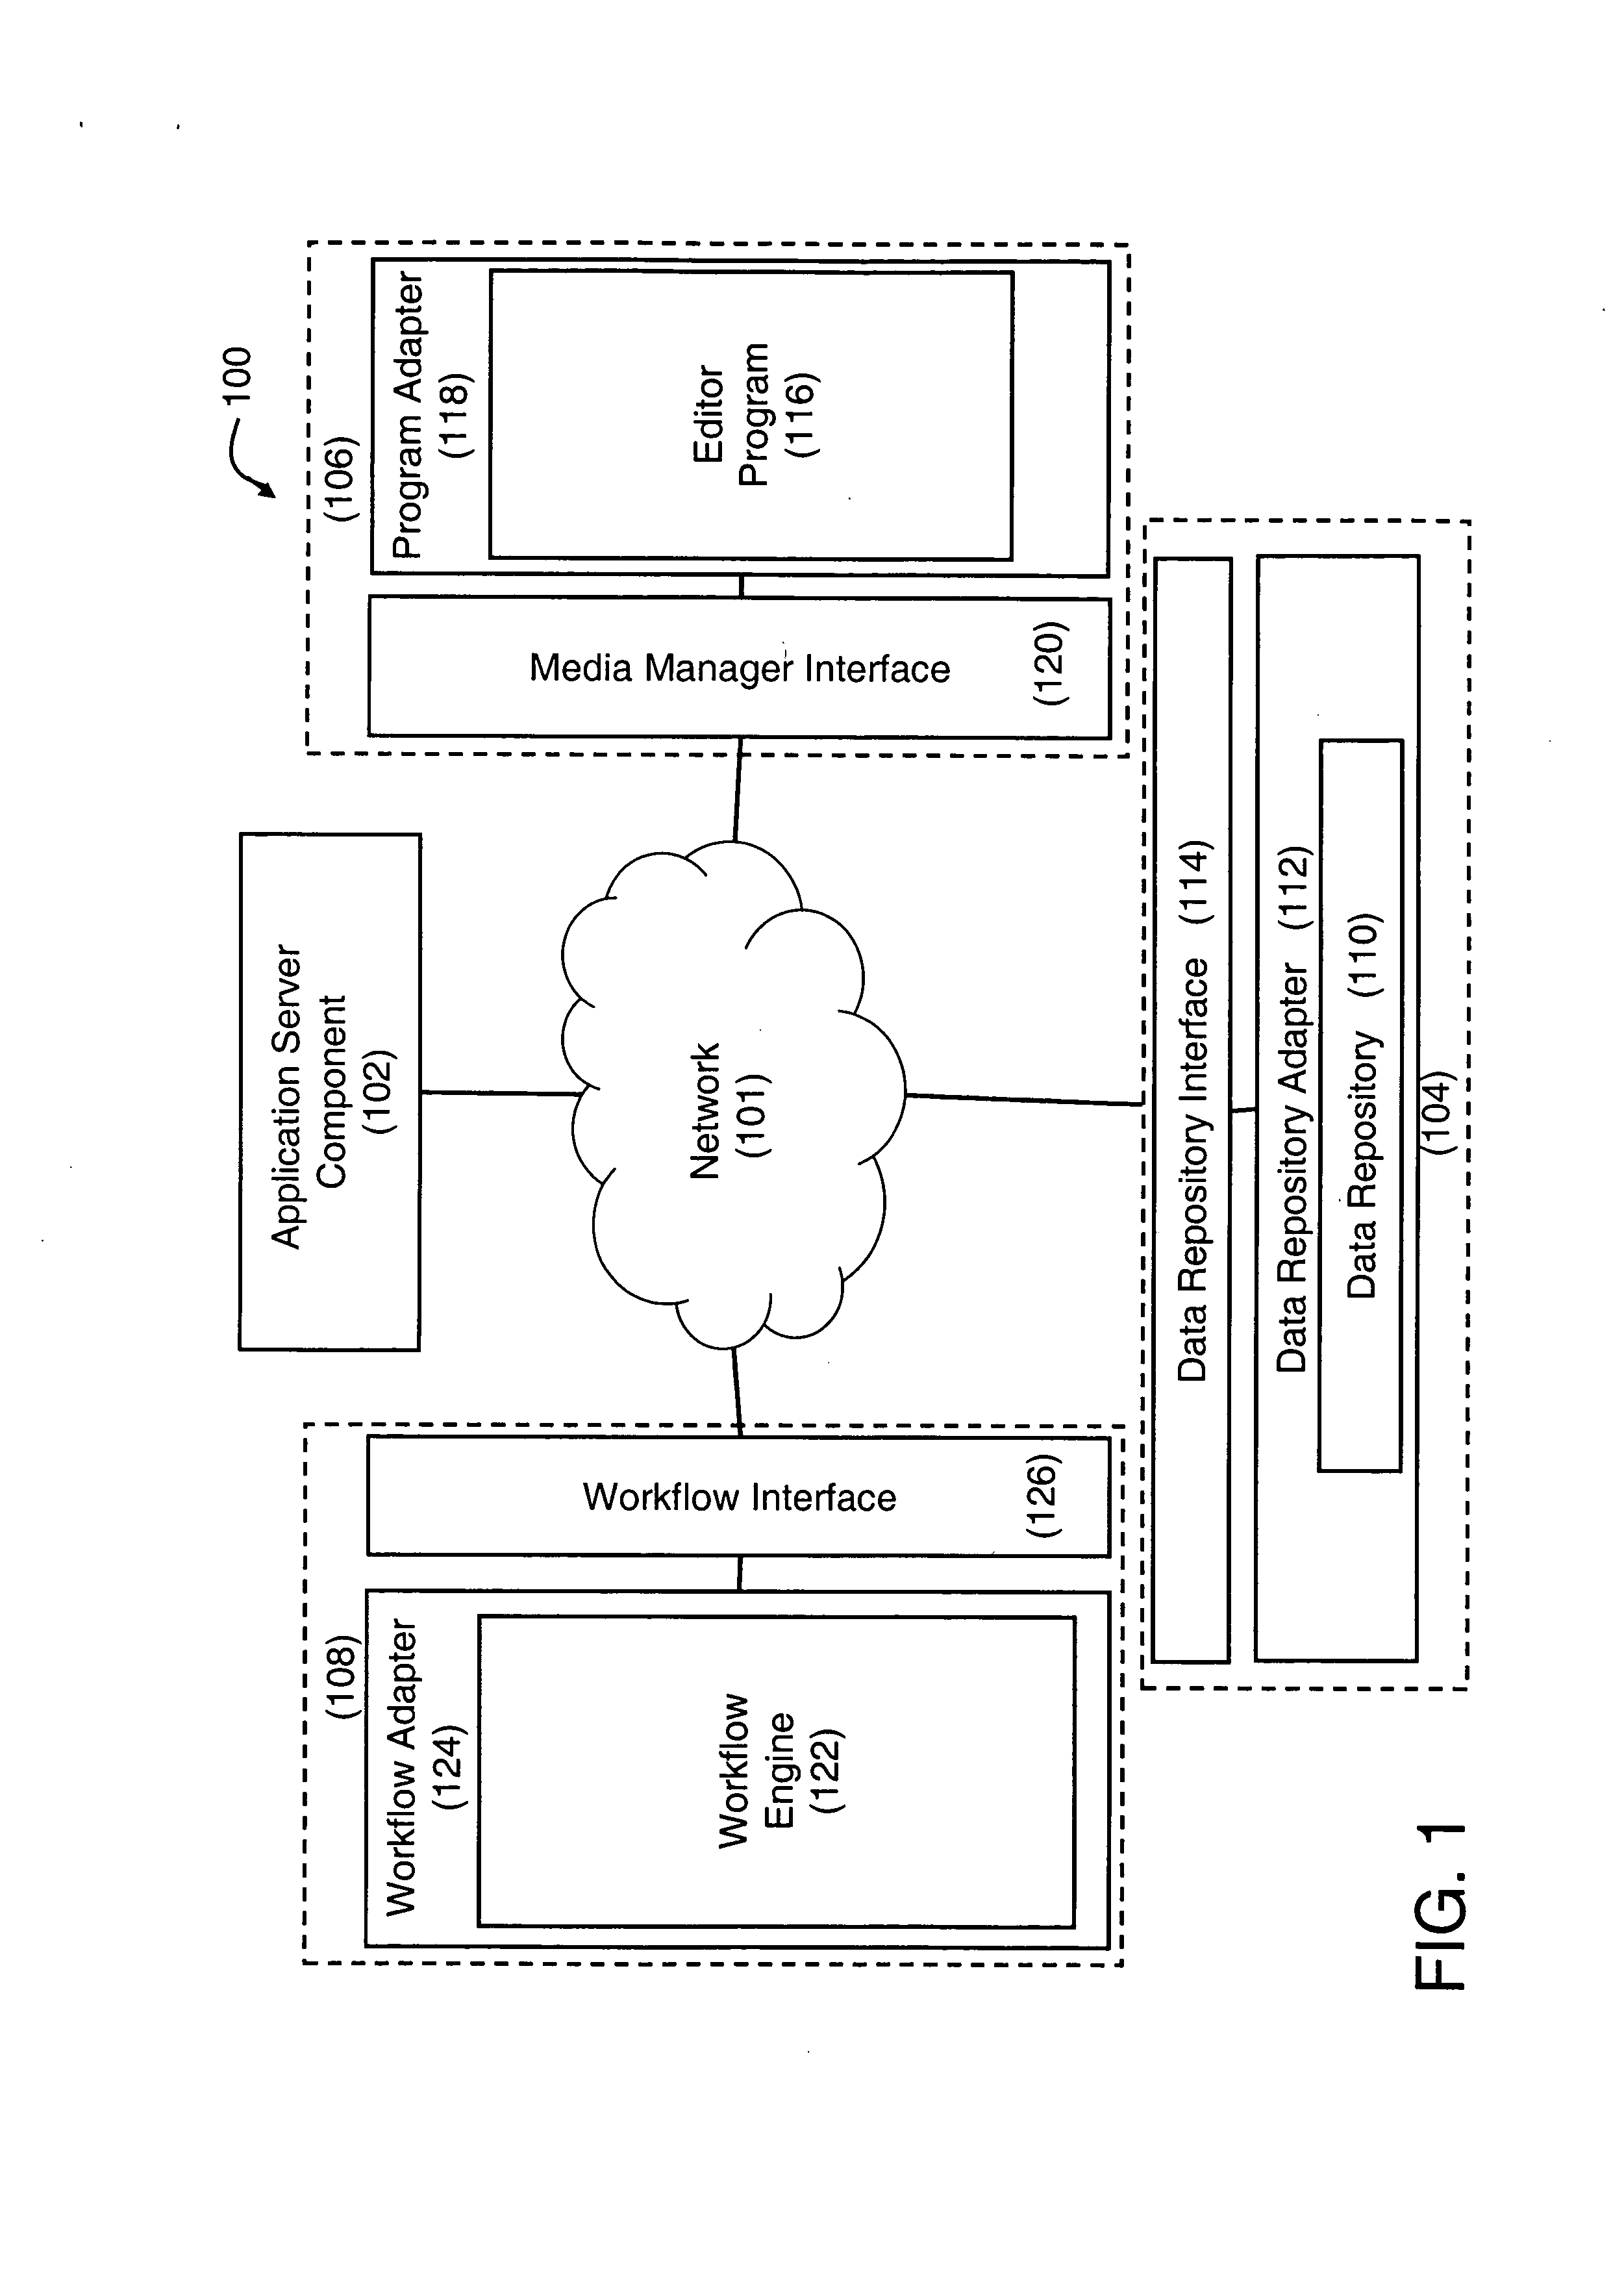 System and method for information creation, management and publication of documentation from a single source